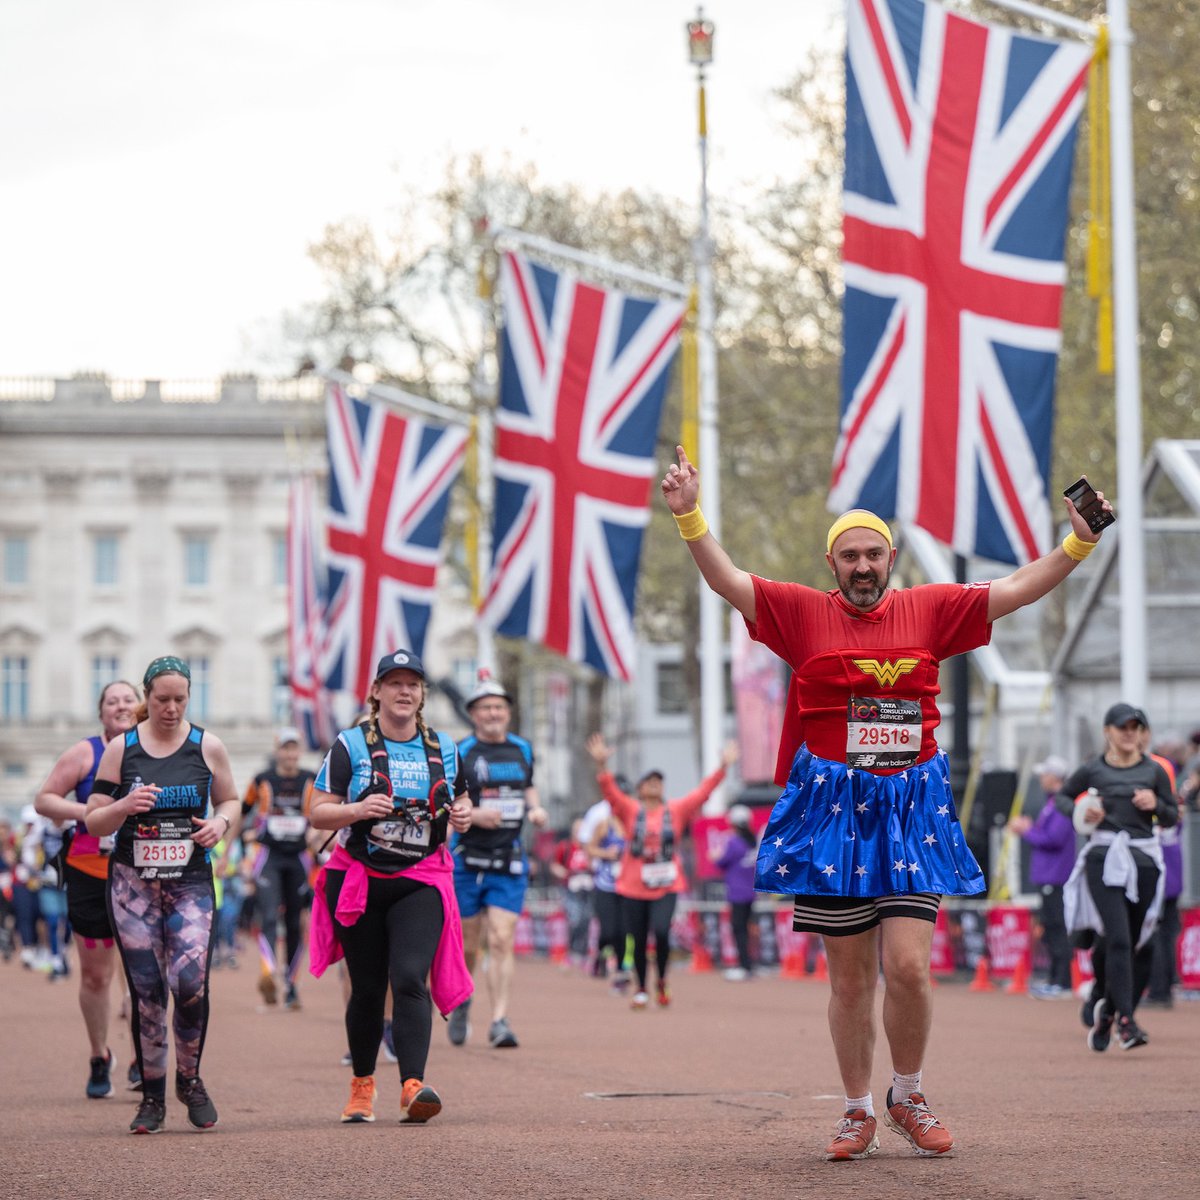 Good luck to everyone taking part in today's TCS @LondonMarathon! Remember your training, take inspiration from the crowd, and savour every moment of this great race. We'll be cheering you on all the way to the finish line.